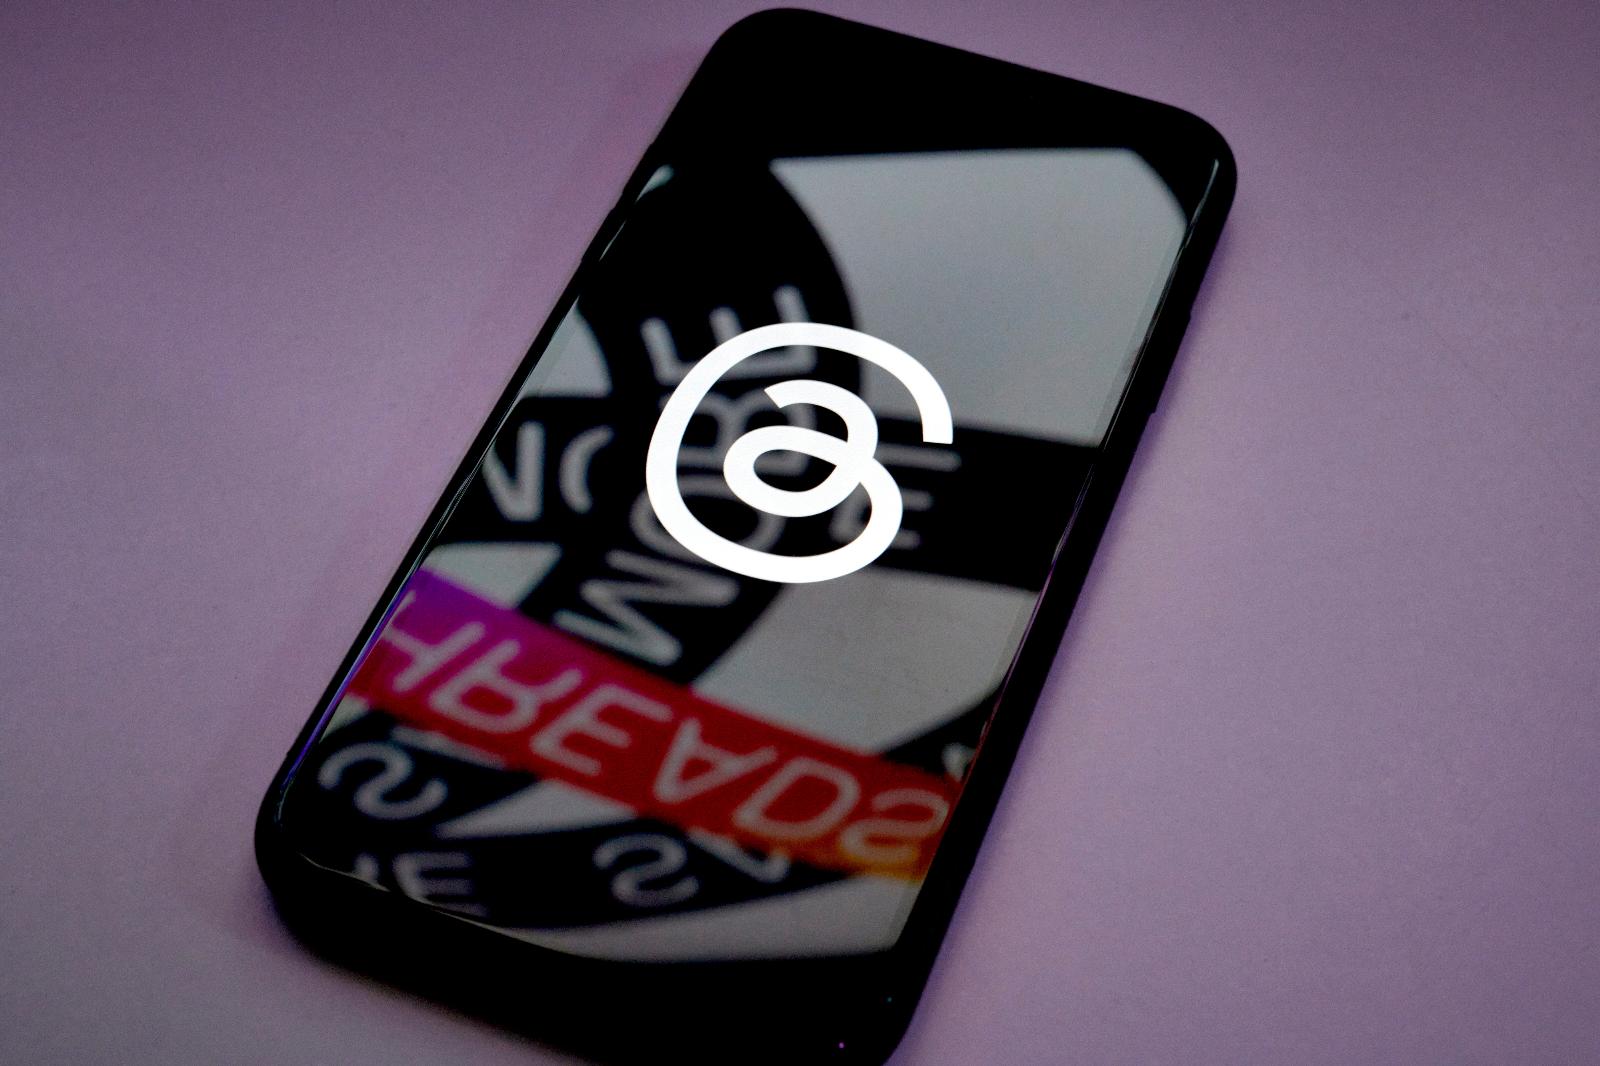 Threads app’s latest update gives more prominence to reposts